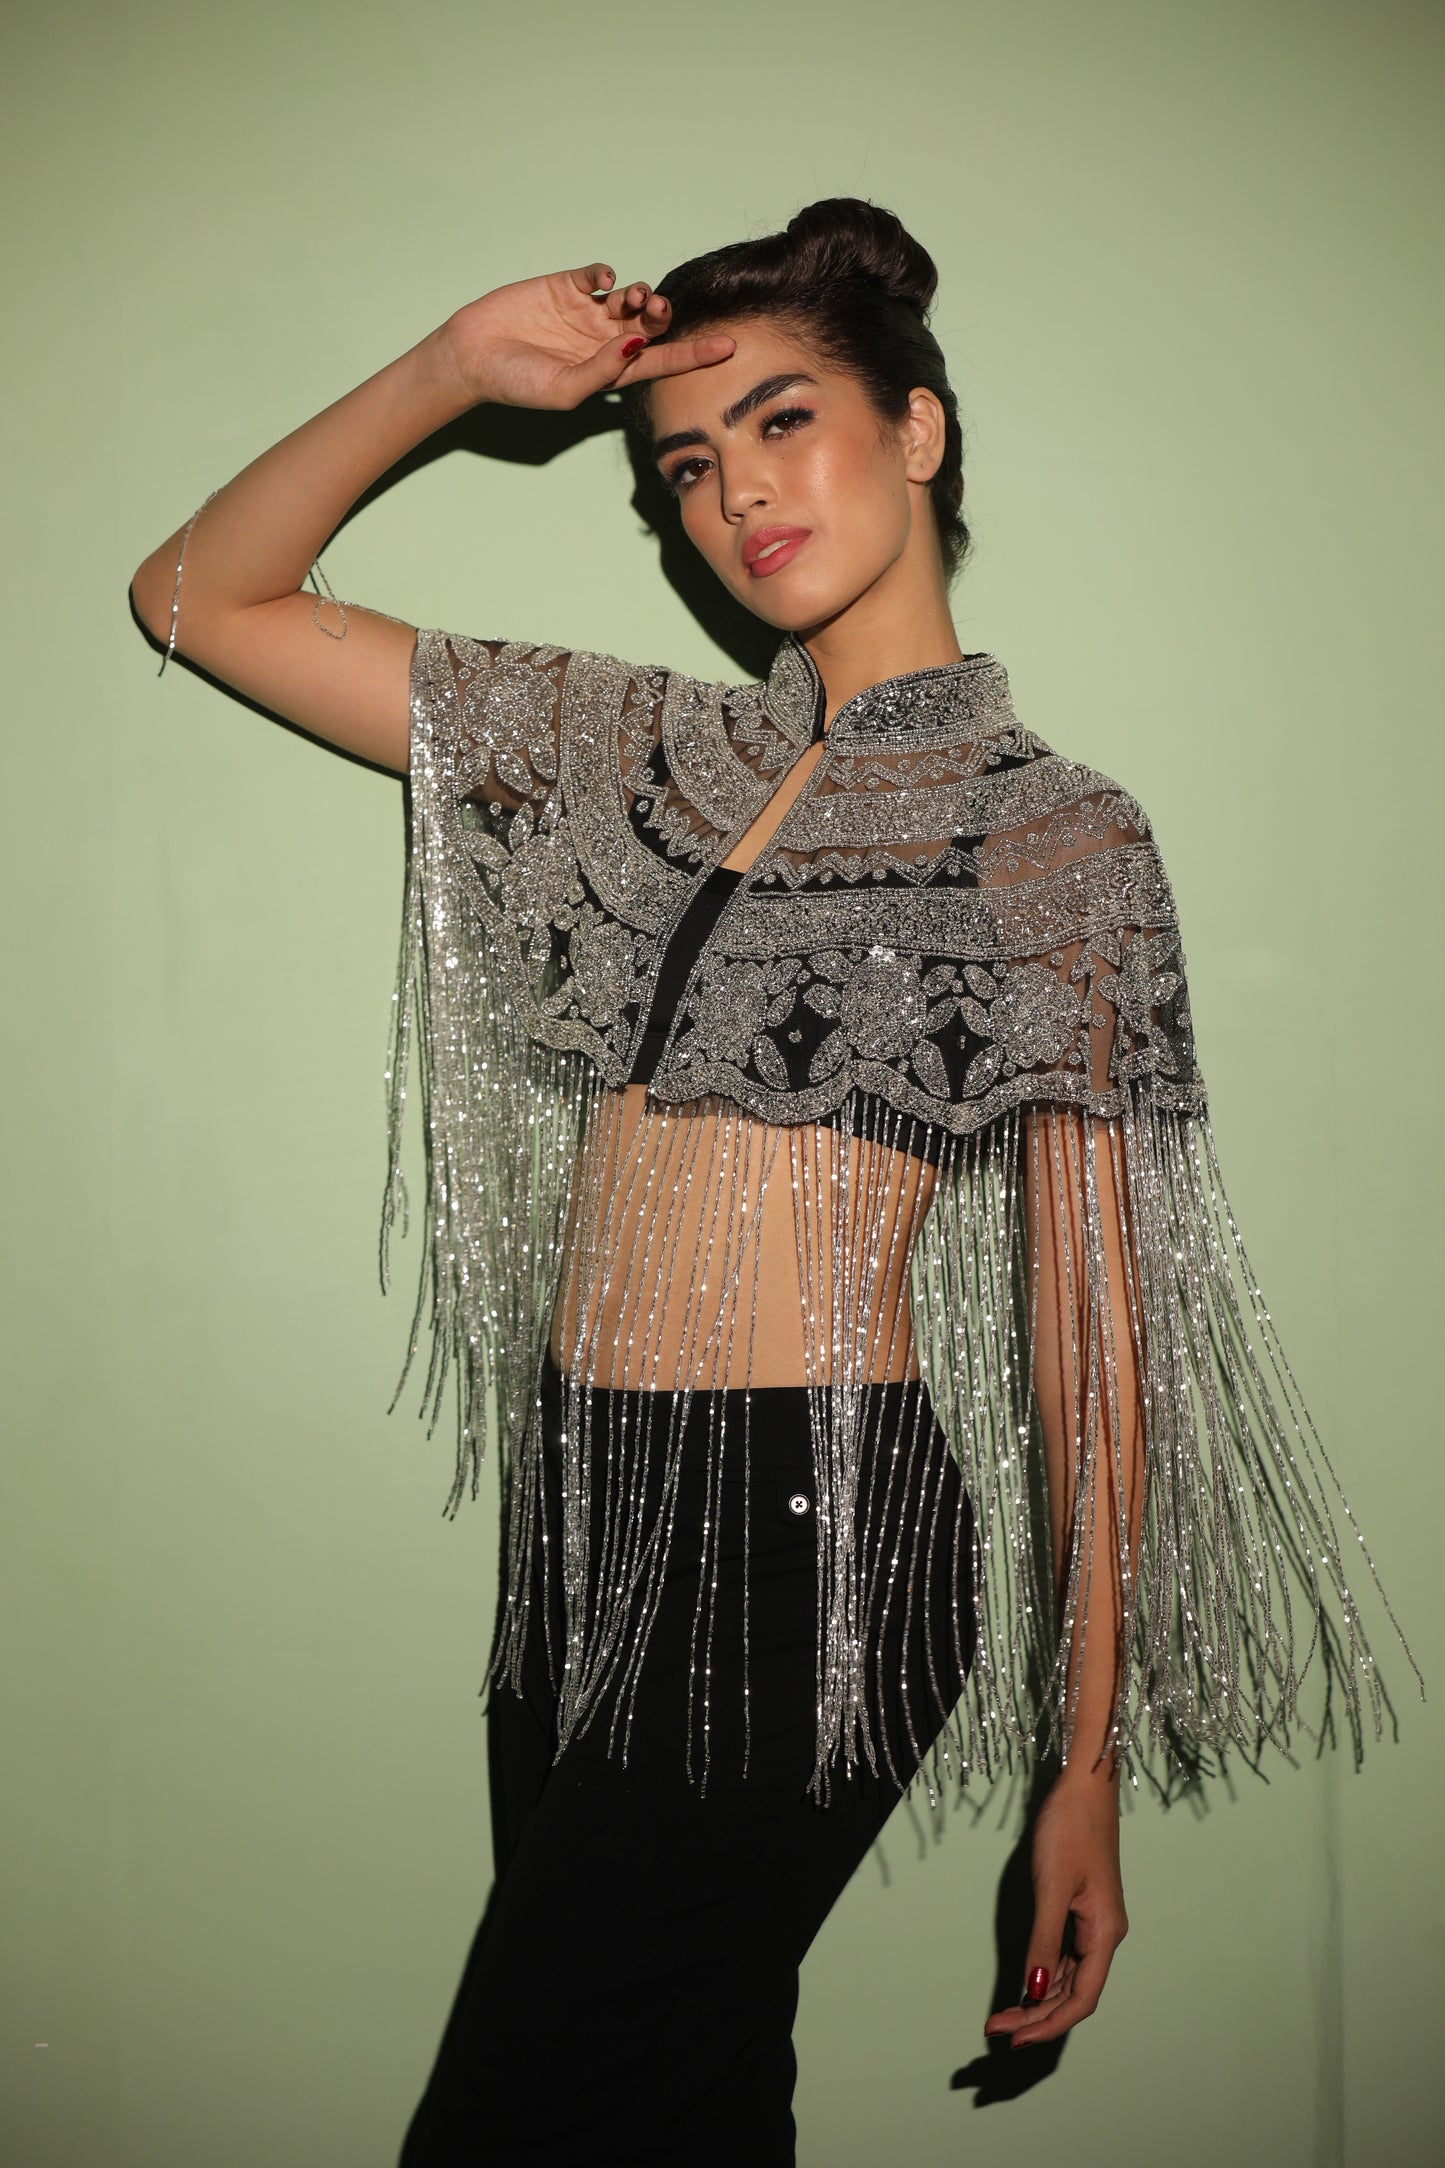 Unique Silver Beaded Cape with Embroidery: Ideal for pairing with sarees and gowns." "Intricate Handcrafted Cape: Beautifully designed with intricate embroidery and tassels